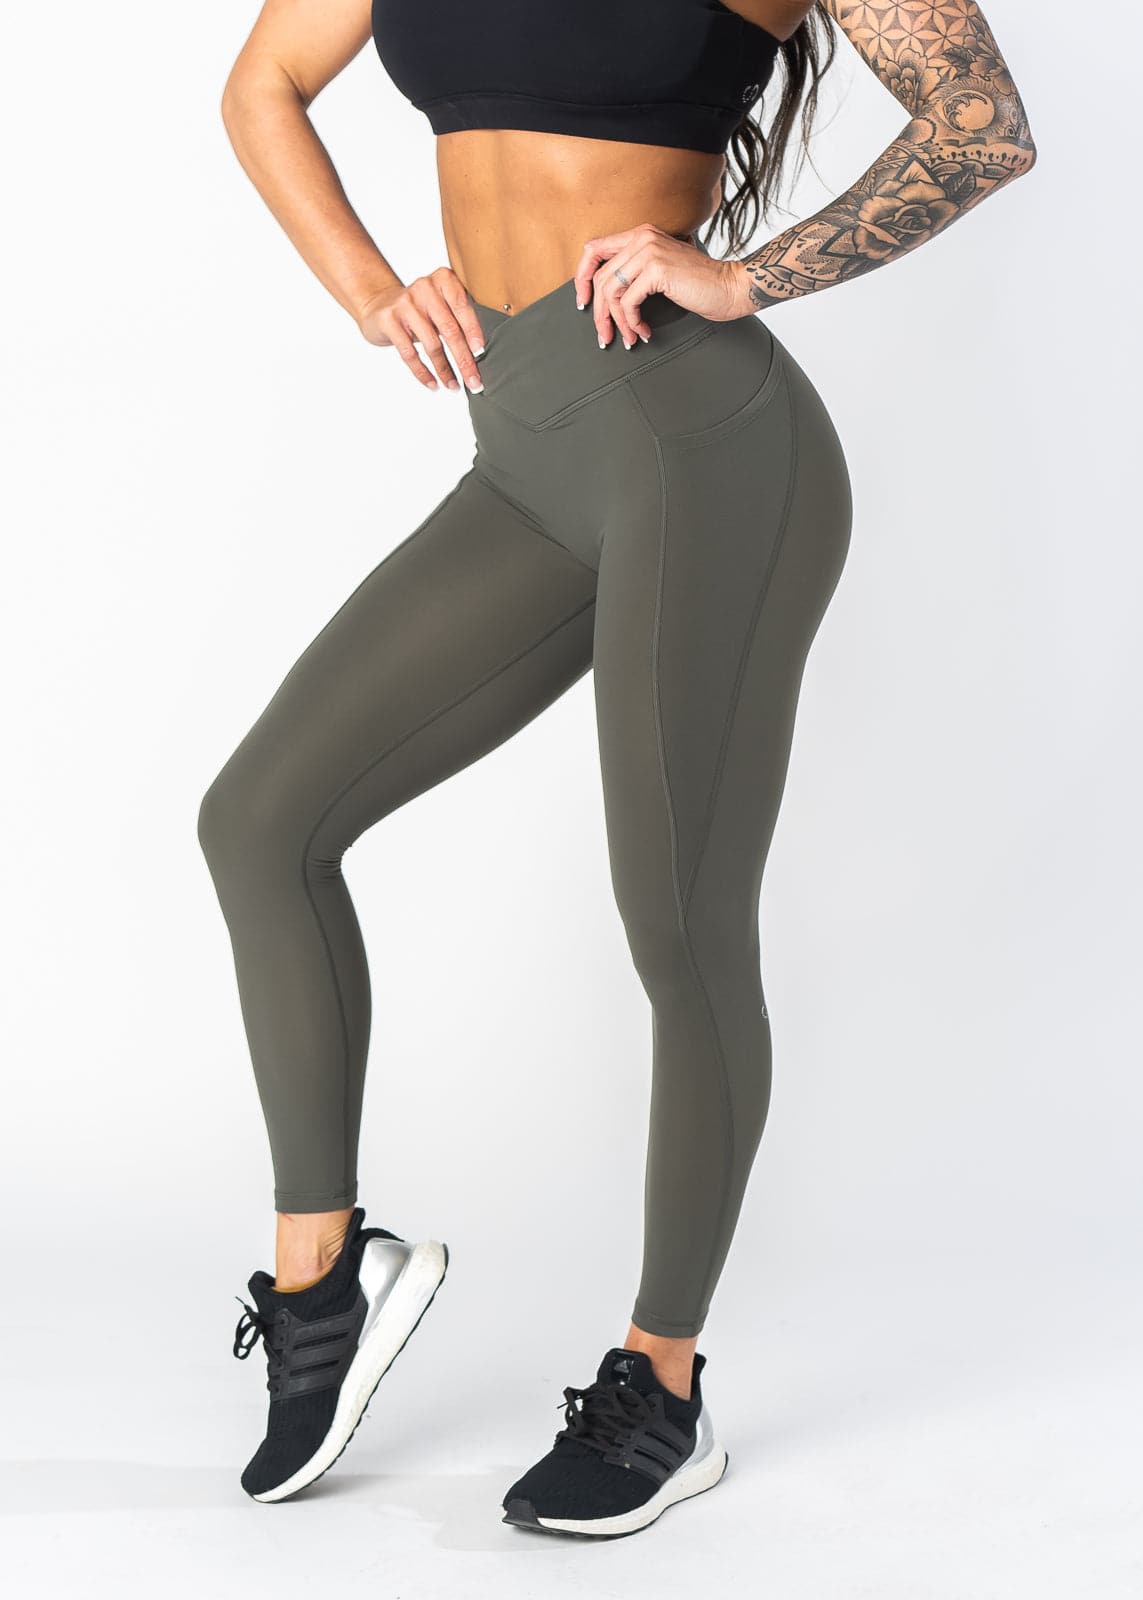 Seamless Leggings Sport Women Fitness High Waist Yoga Pants Squat Proof  Tummy Control Butt Lift Gym Booty Scrunch Tights Makfacp (Color : 5, Size :  Small) price in UAE | Amazon UAE | kanbkam